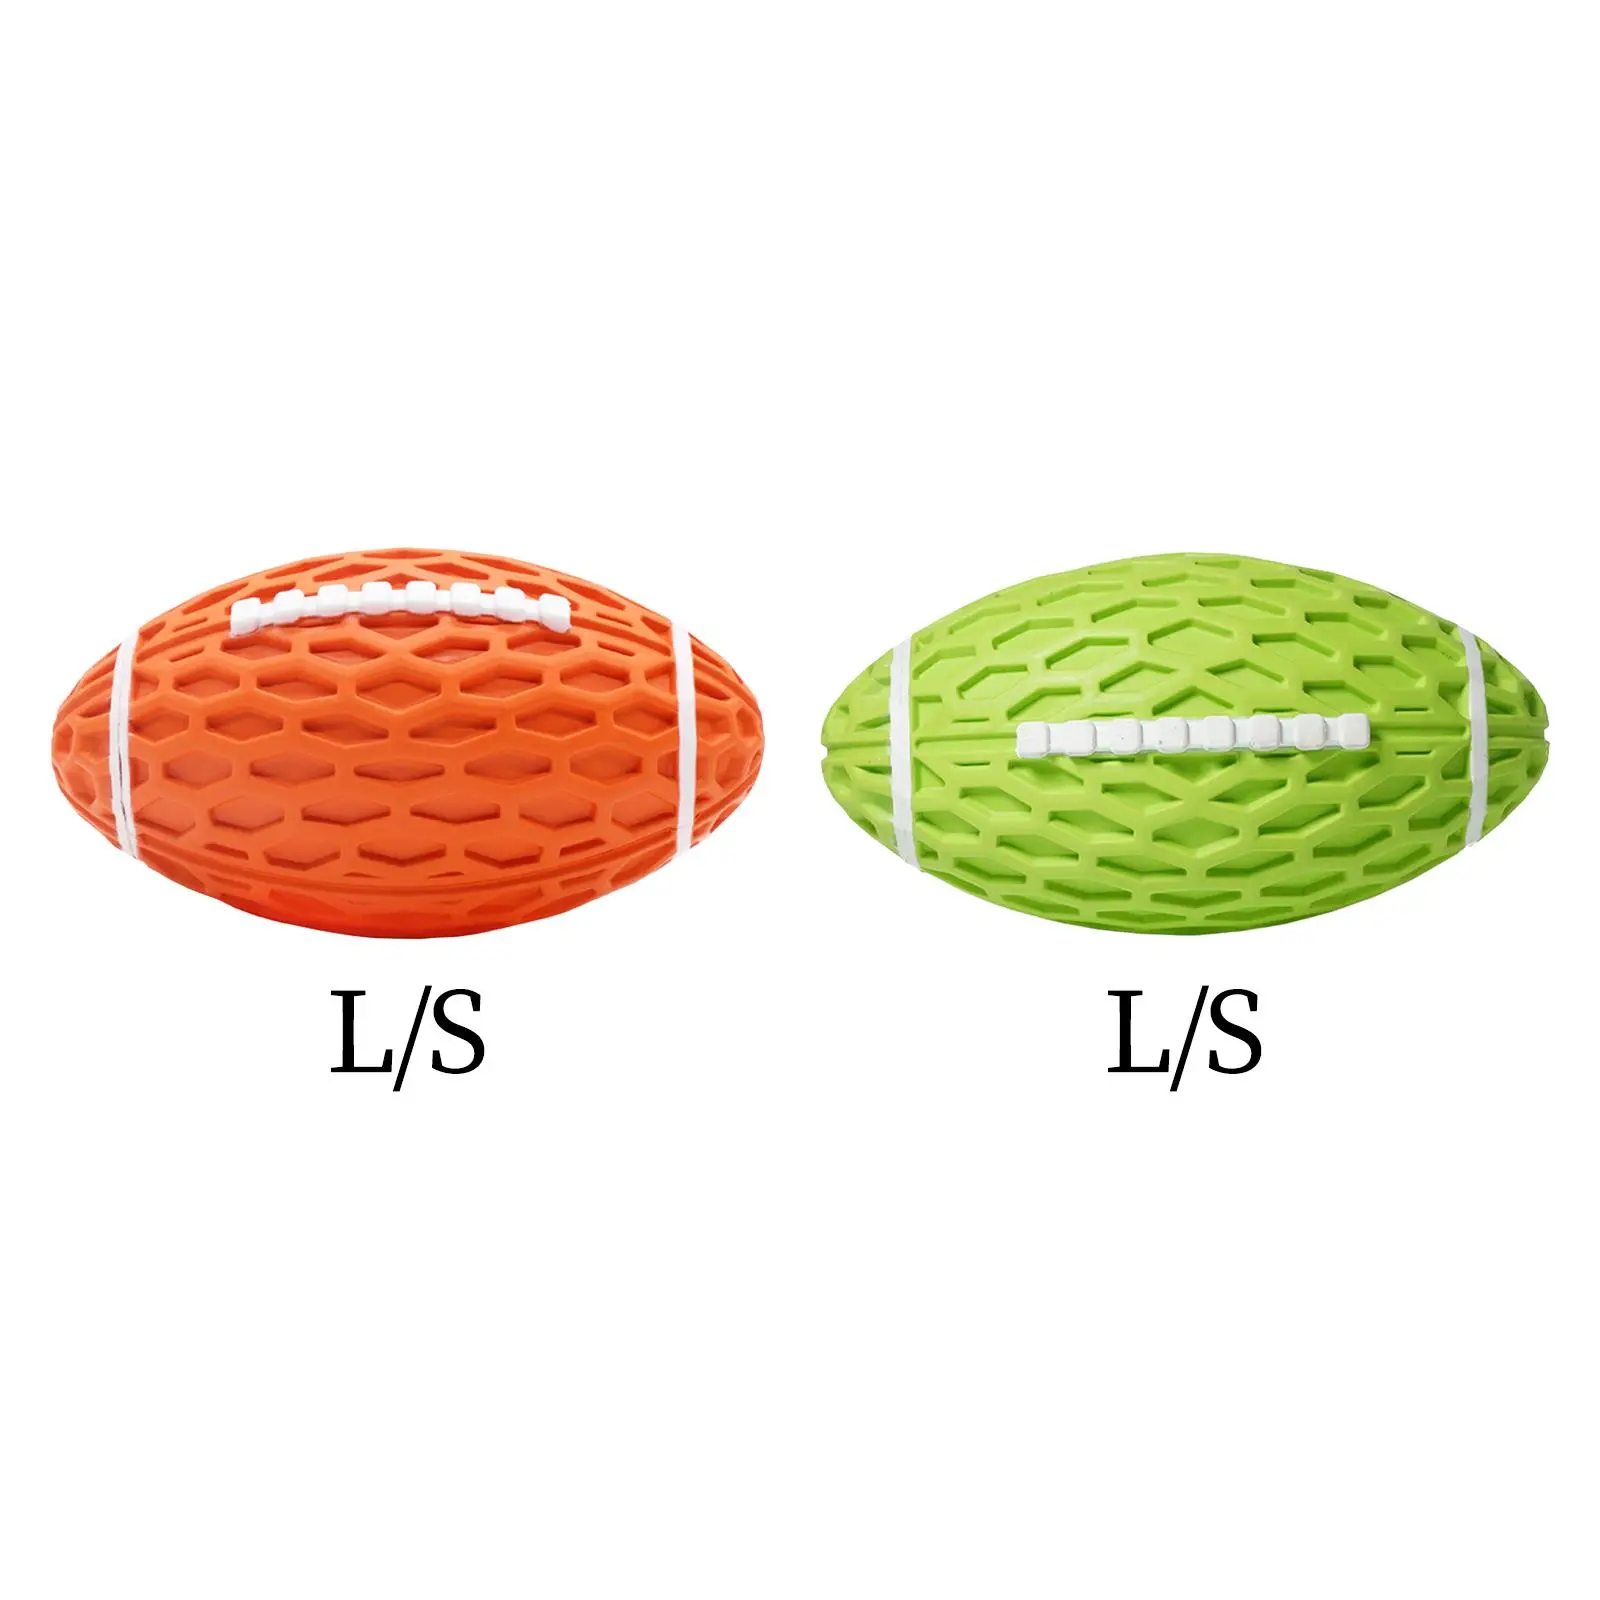 Dog Toy Balls Rugby Durable Pet Exercise Tough Rubber Dog Interactive Ball for Training Outdoor Puppy Small Medium Large Dogs